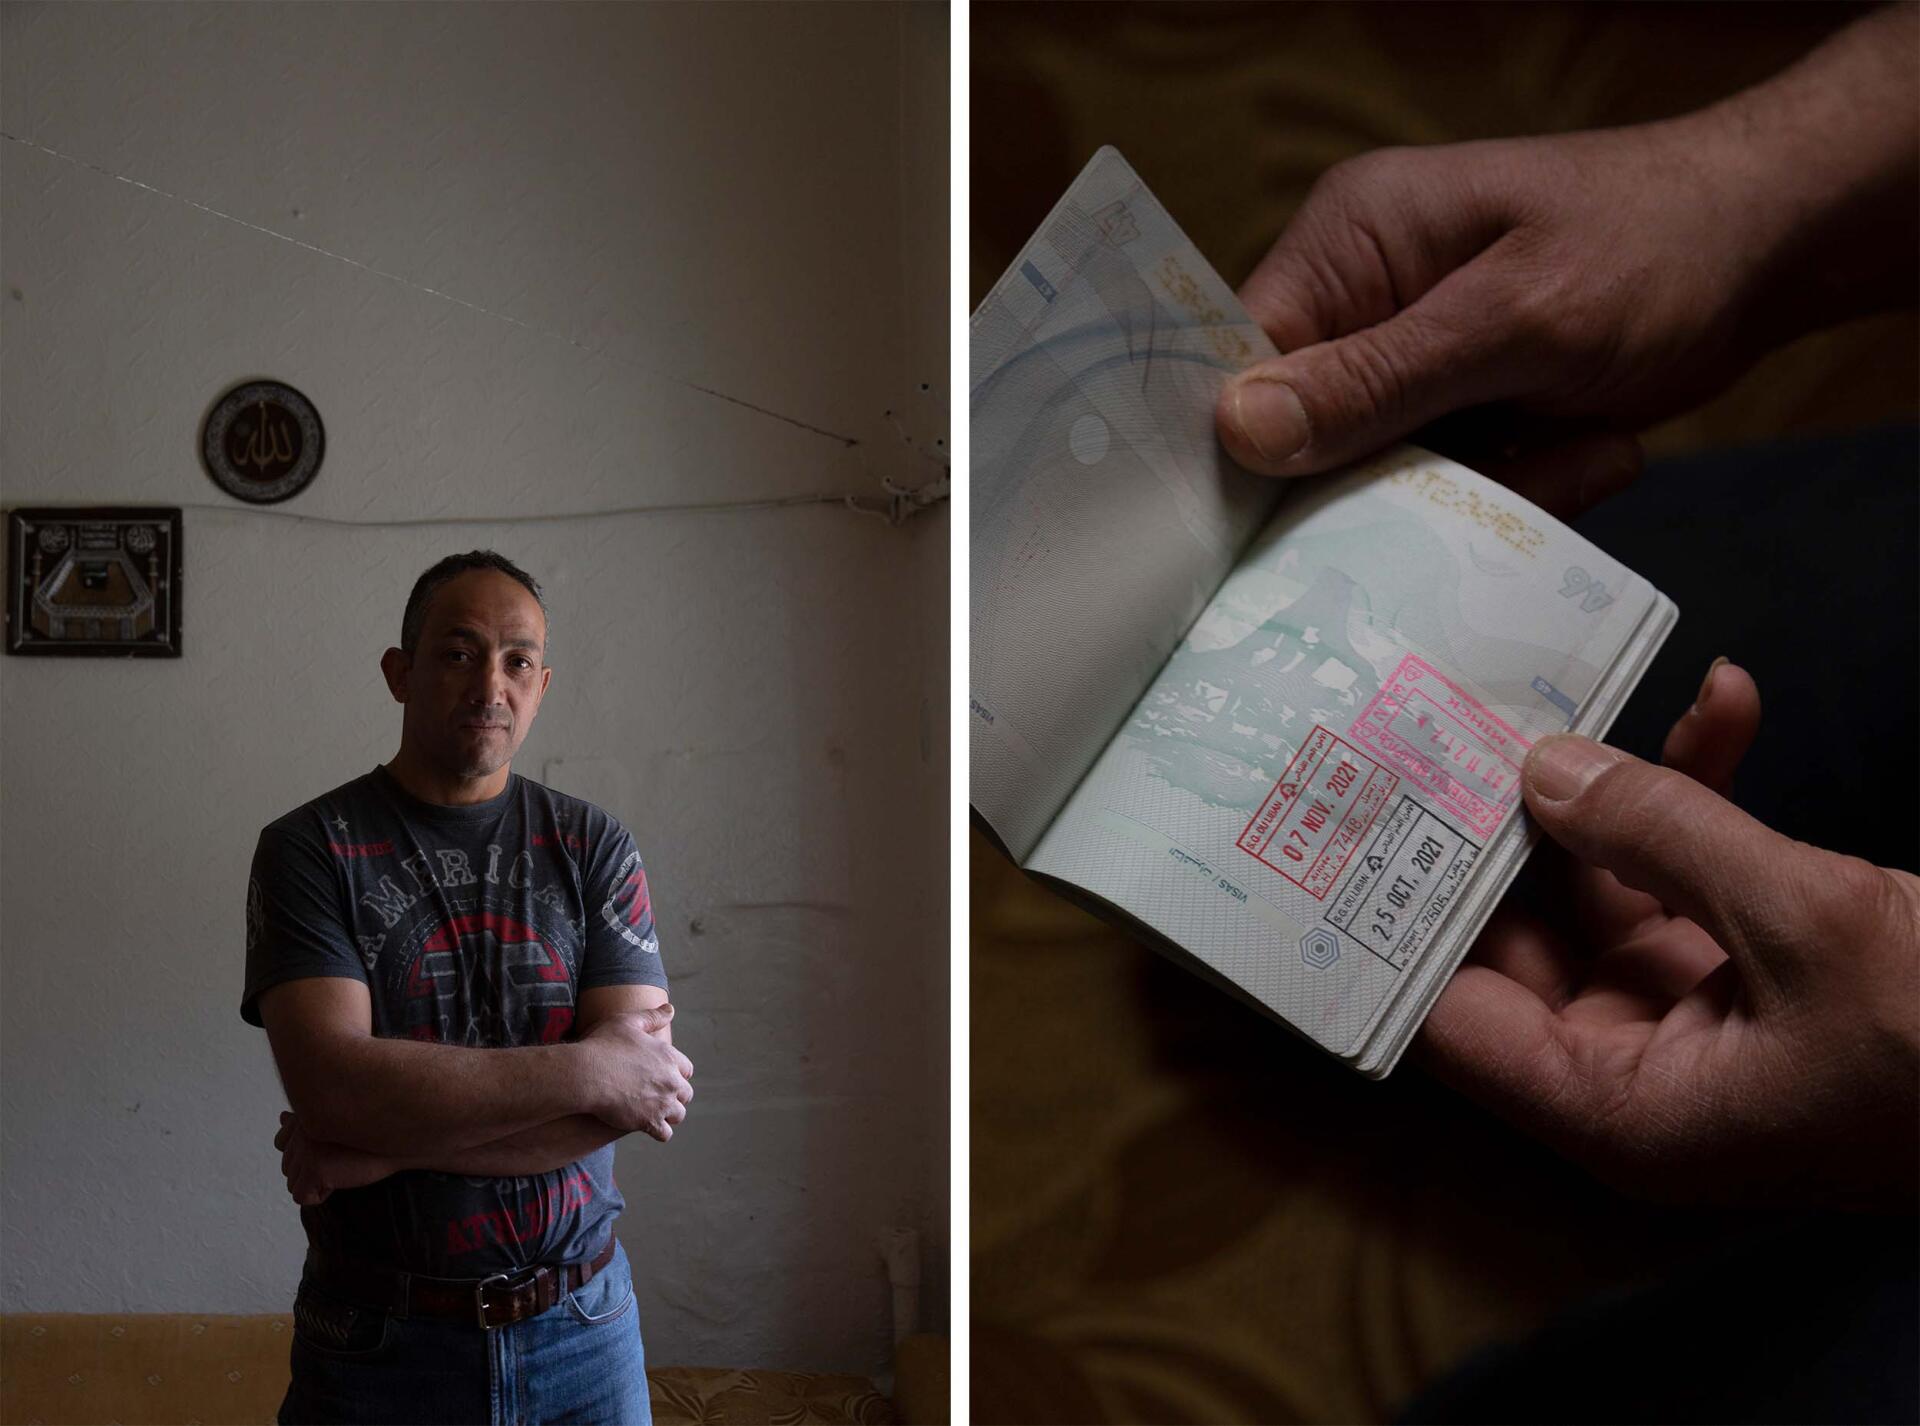 Amer, a Palestinian, shows the stamps on his refugee travel document in the living room of his small apartment in Al-Jalil camp, at the entrance to Baalbek, eastern Lebanon, November 19, 2021.